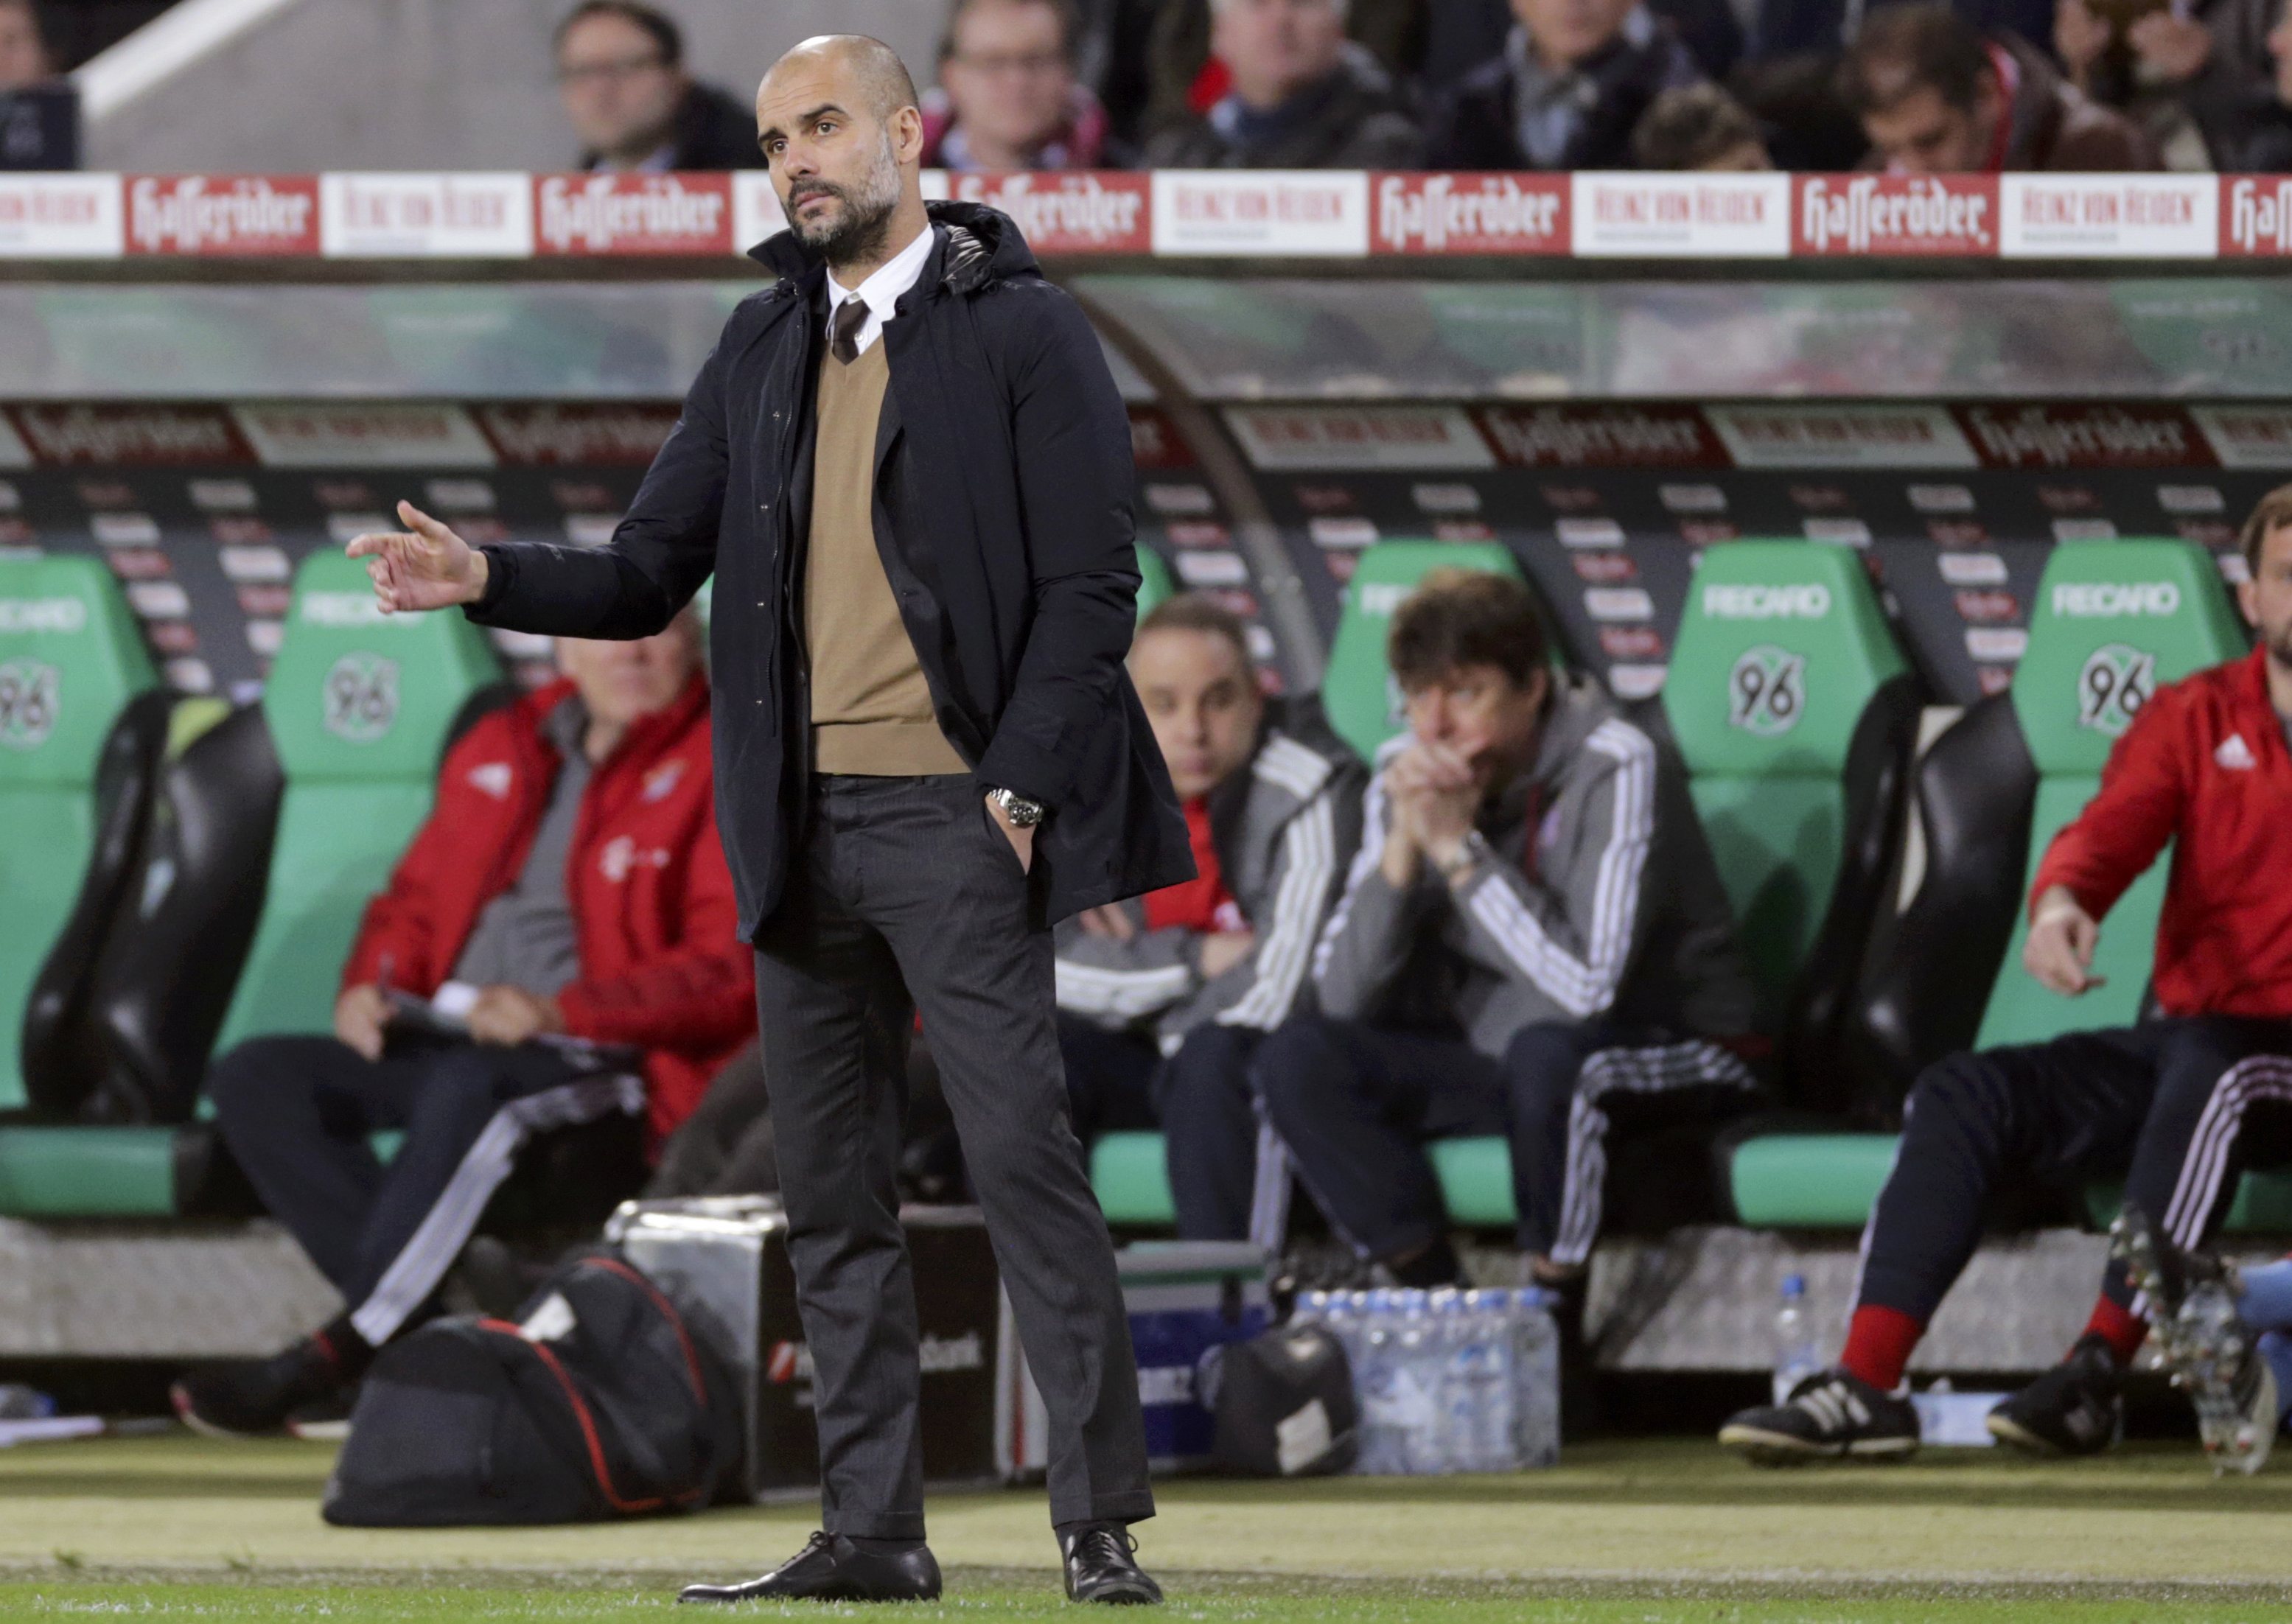 Bayern Munich's coach Pep Guardiola during the match on December 5, 2015. Photo: Reuters